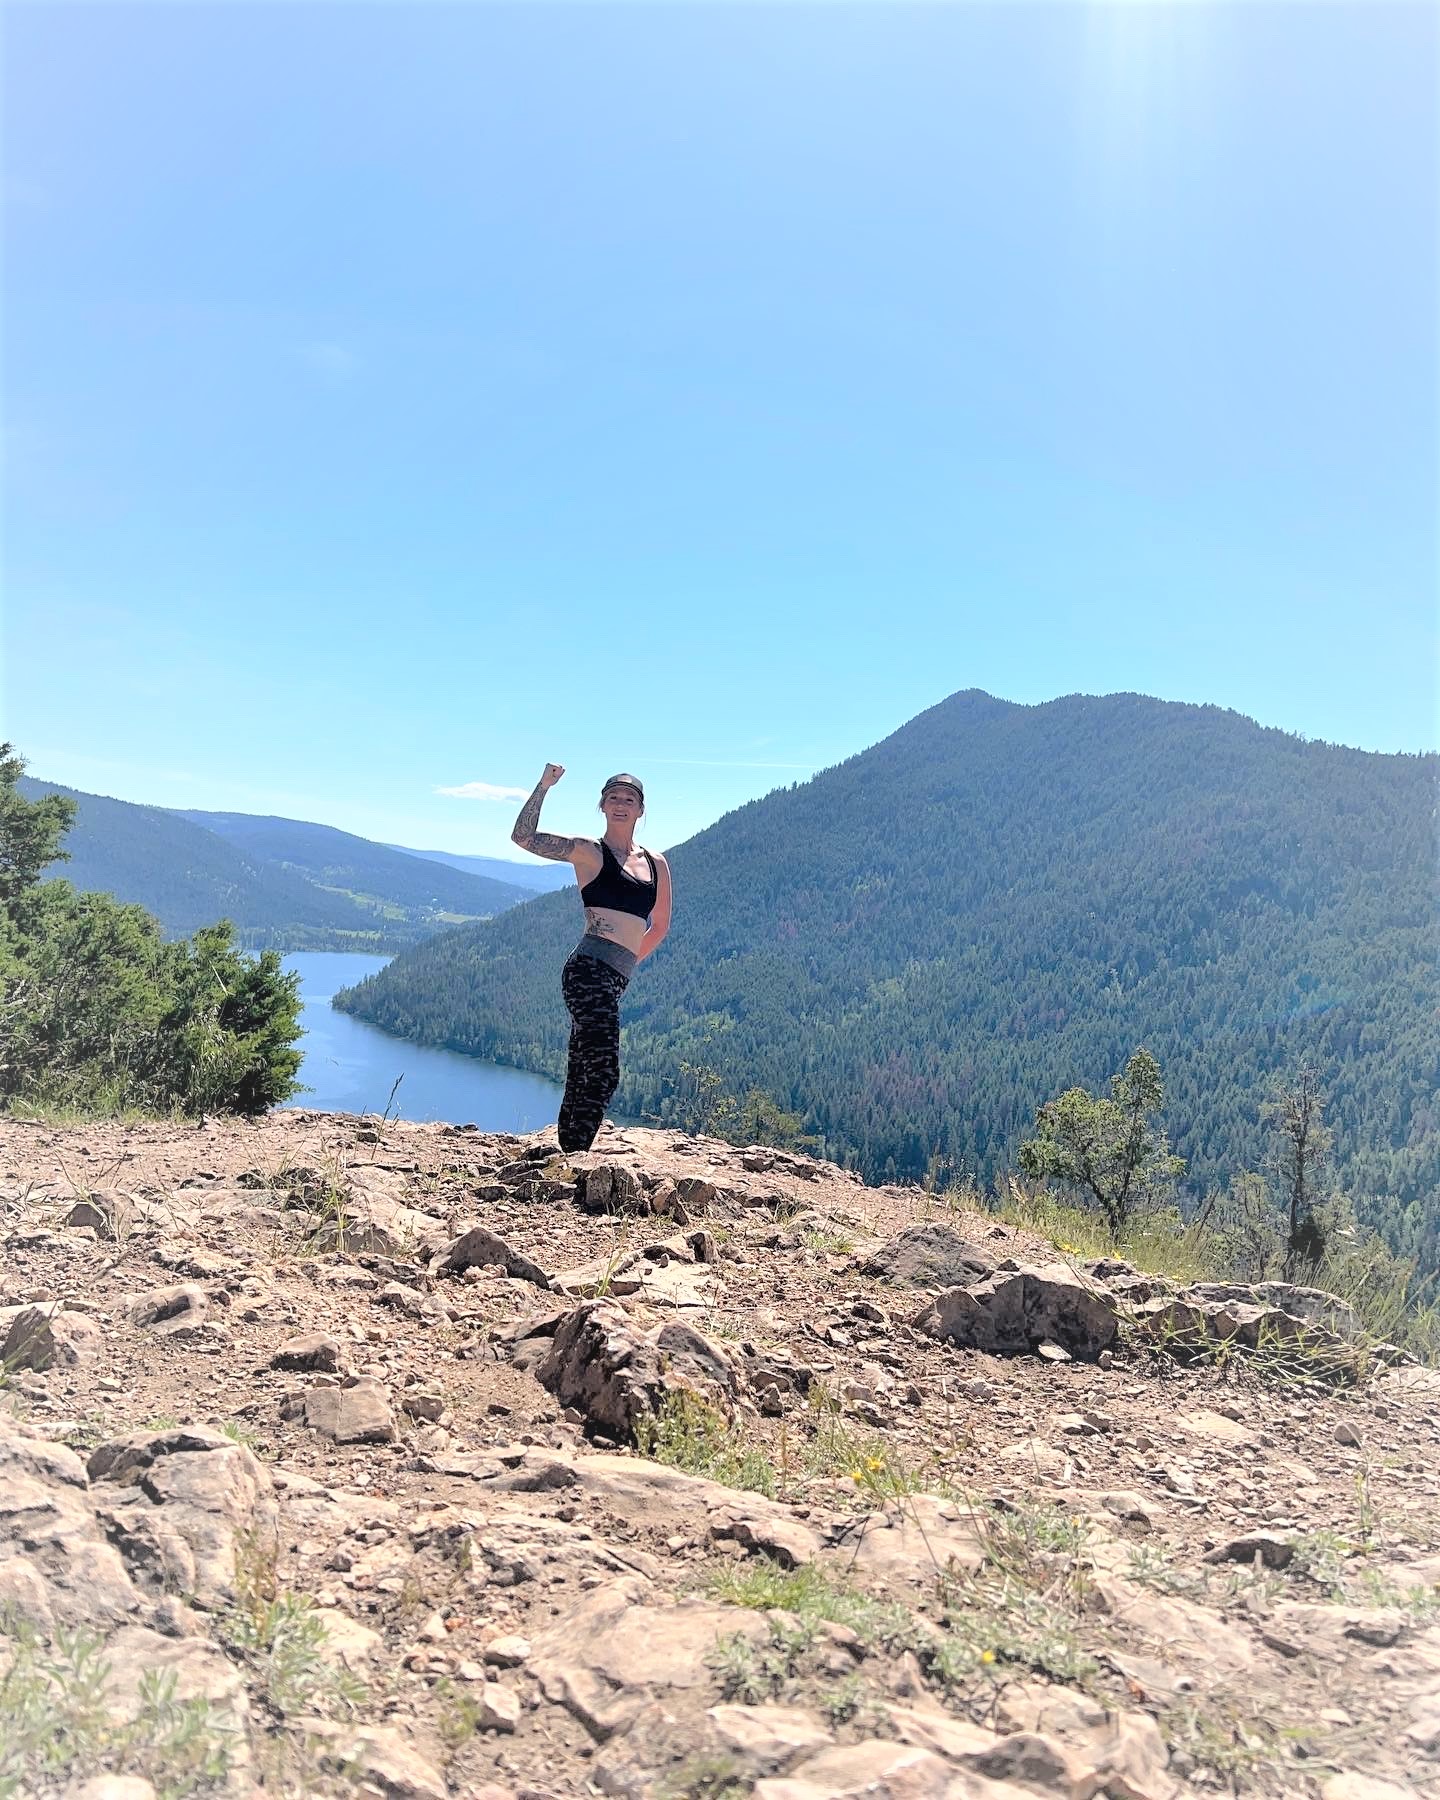 A woman in outdoor active wear flexes her right arm while standing on a rocky cliff. There are large hills with trees and a body of water in the background.